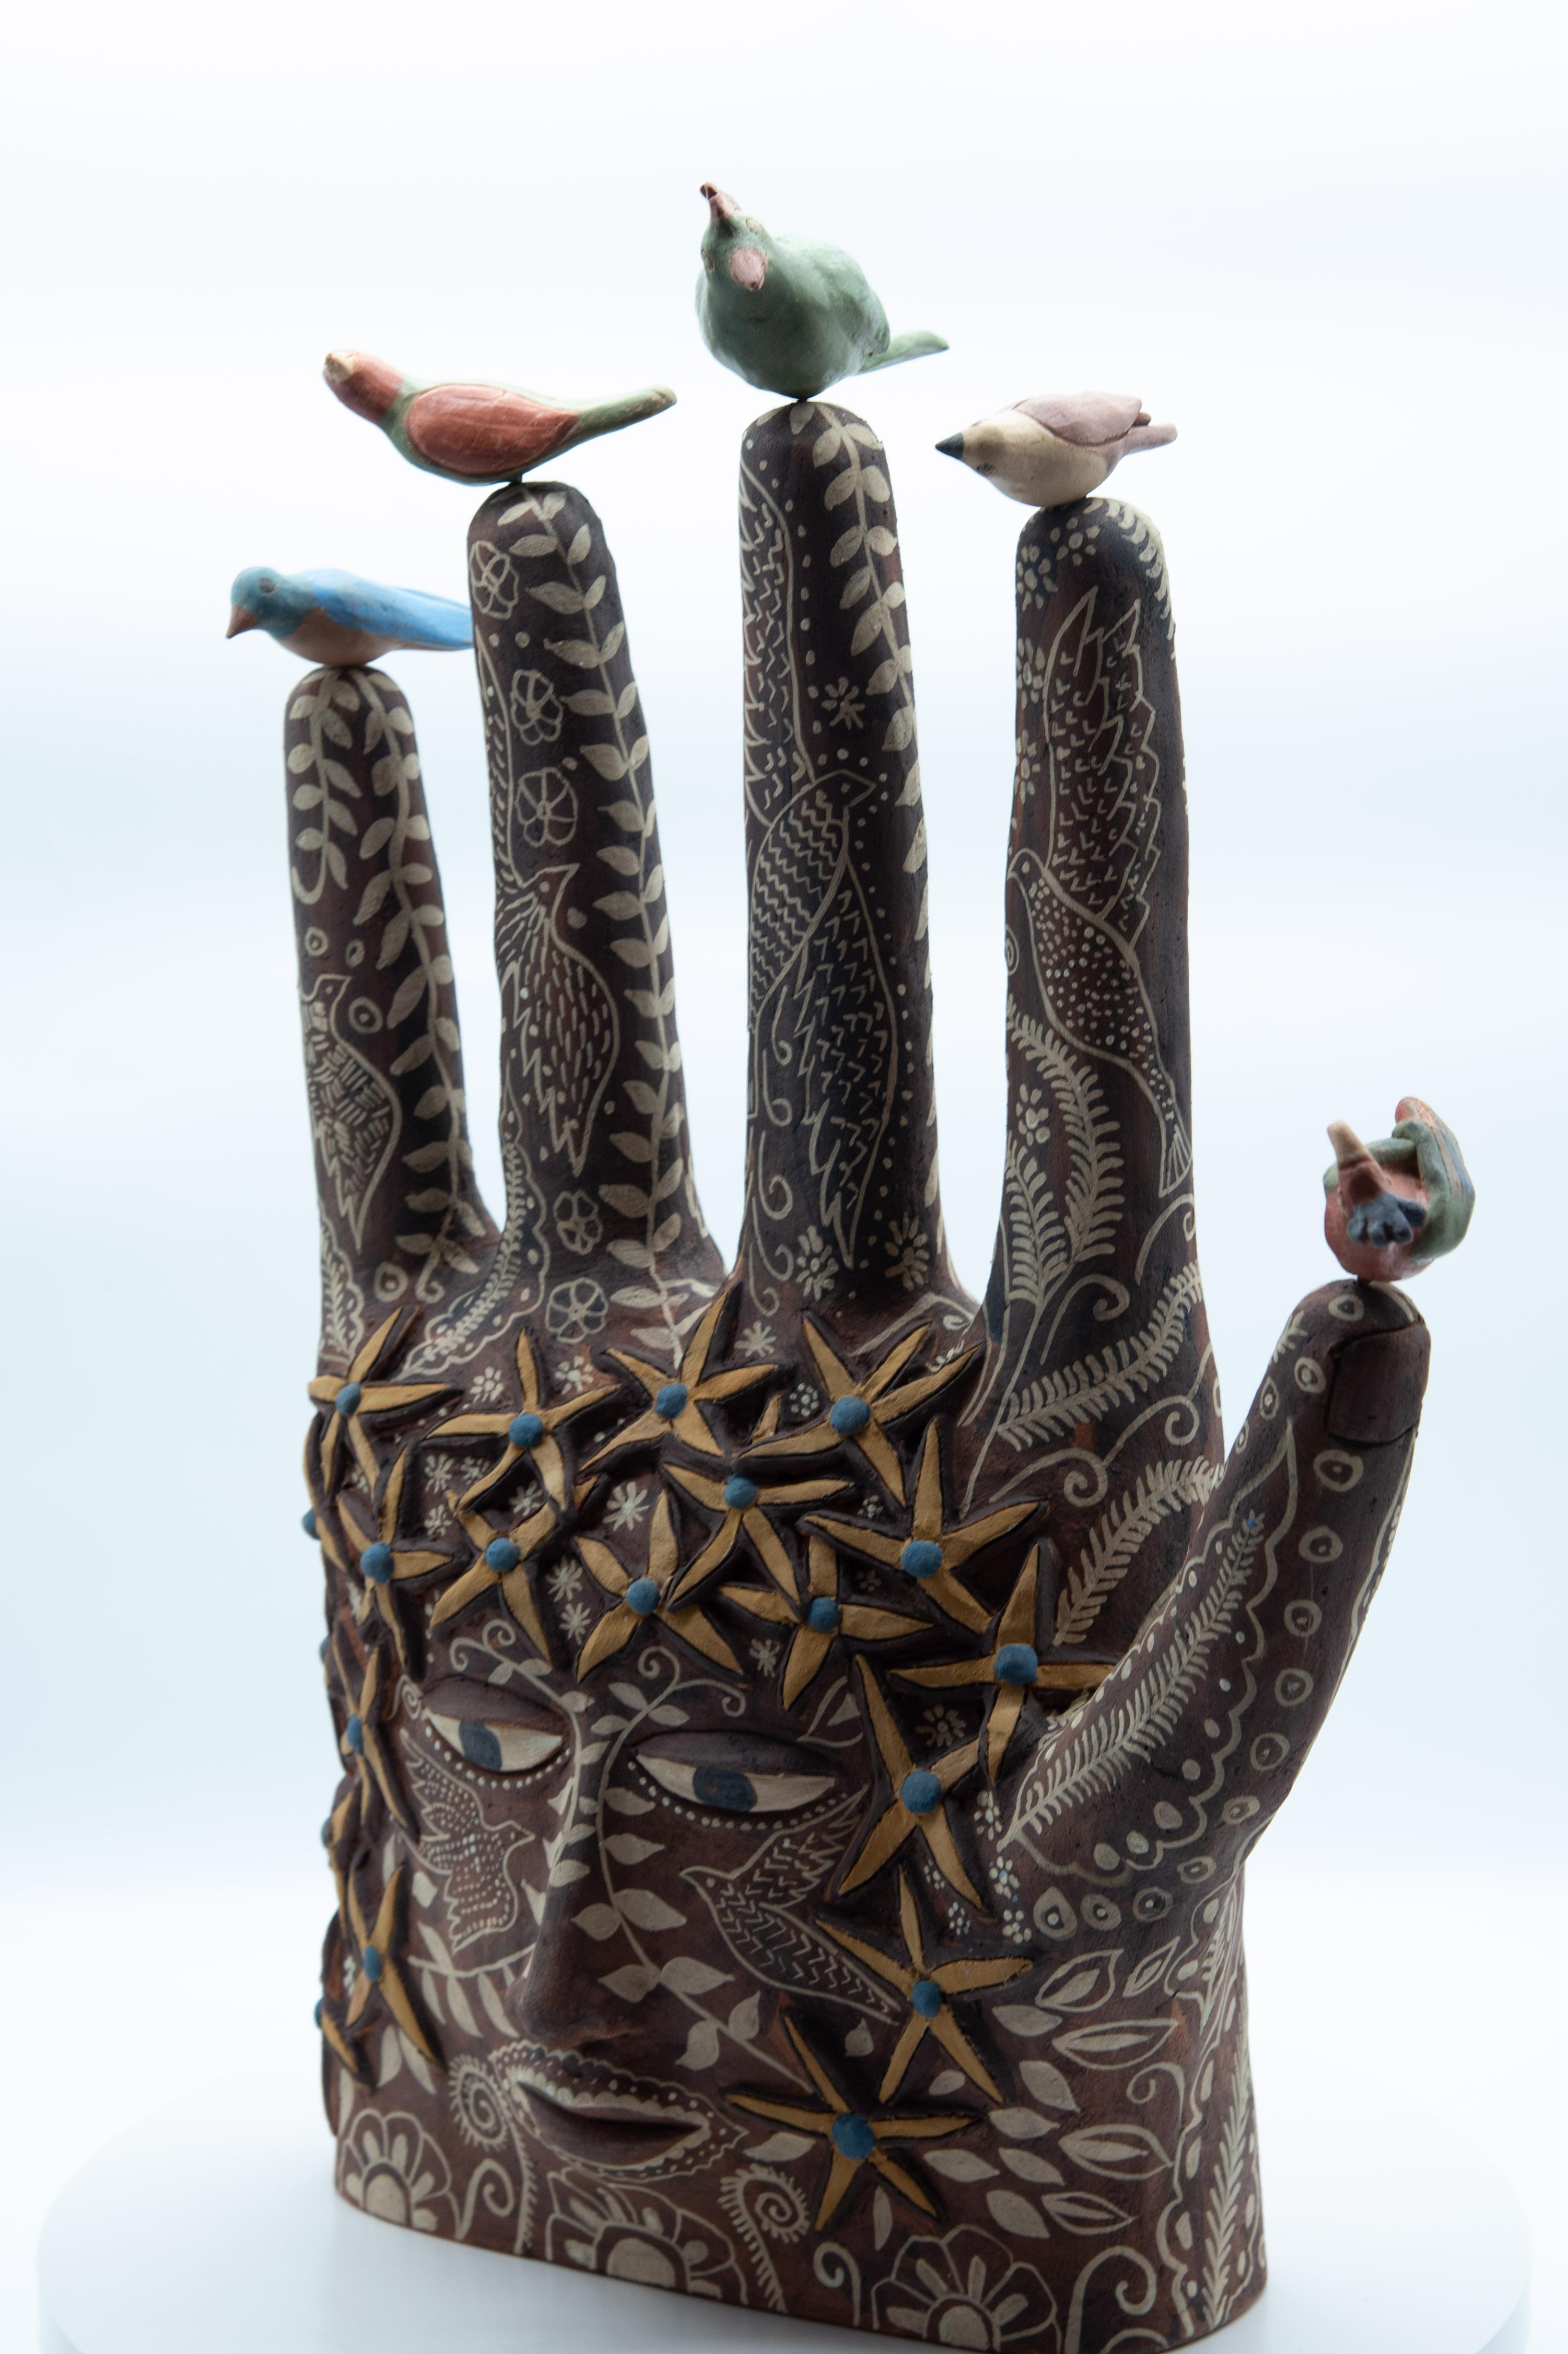 This Mexican ceramic clay hand sculpture is a piece by artist Manuel Reyes. Made with clay from Oaxaca and Zacatecas, painted with oxides from the region. Done with the hand-modeled technique and cooked in traditional wood-fired oven. The hand is